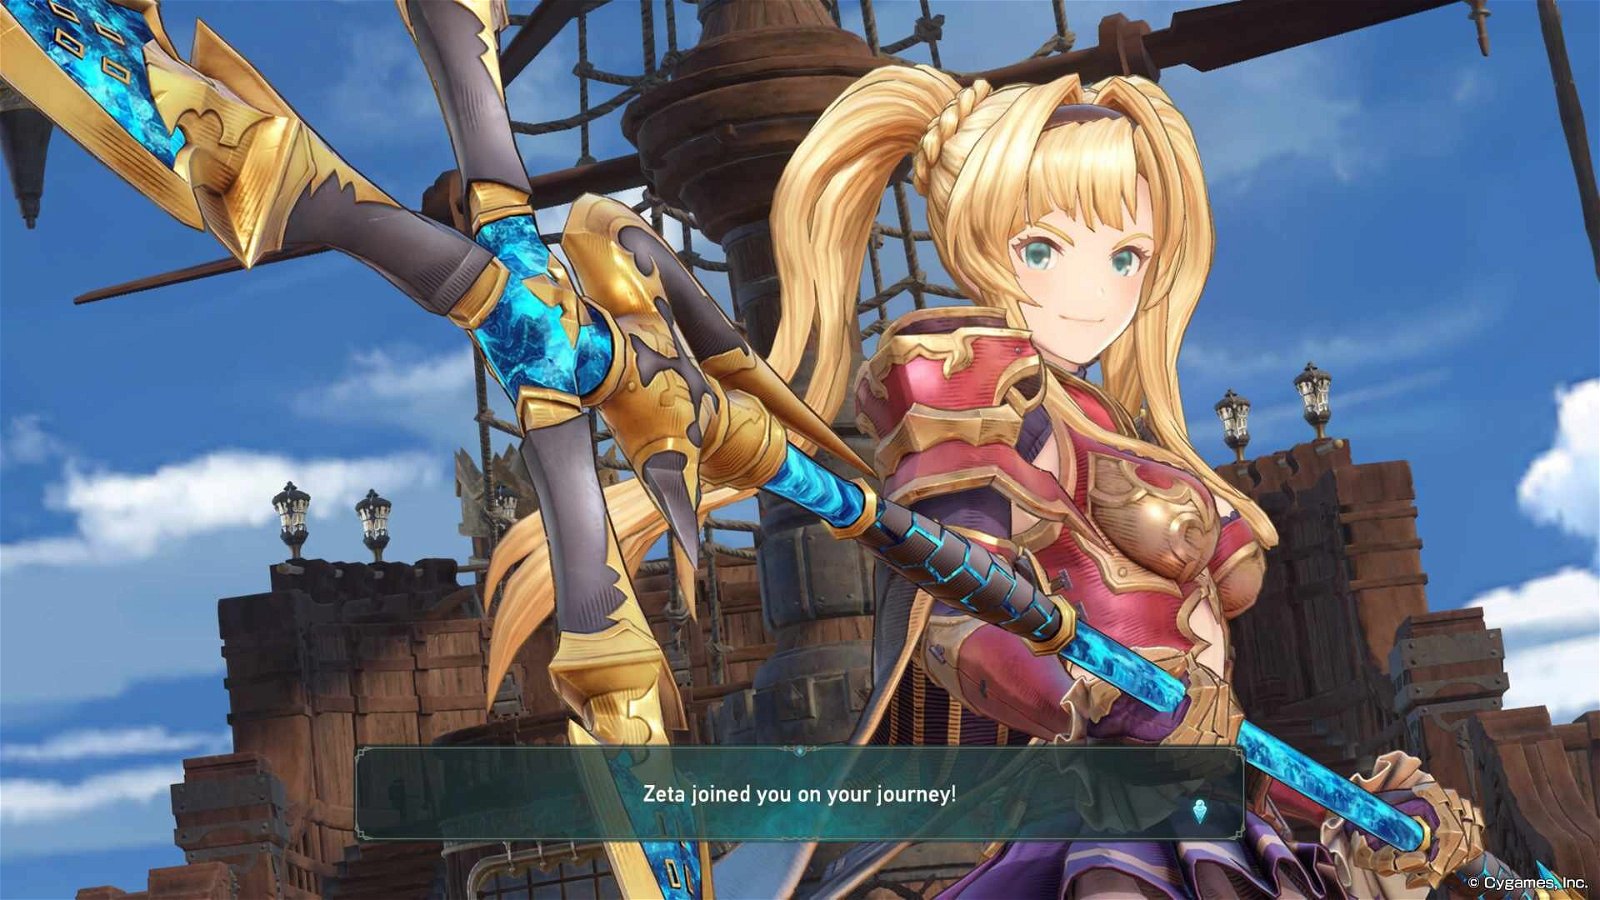 Zeta Joins the party in Granblue Fantasy: Relink